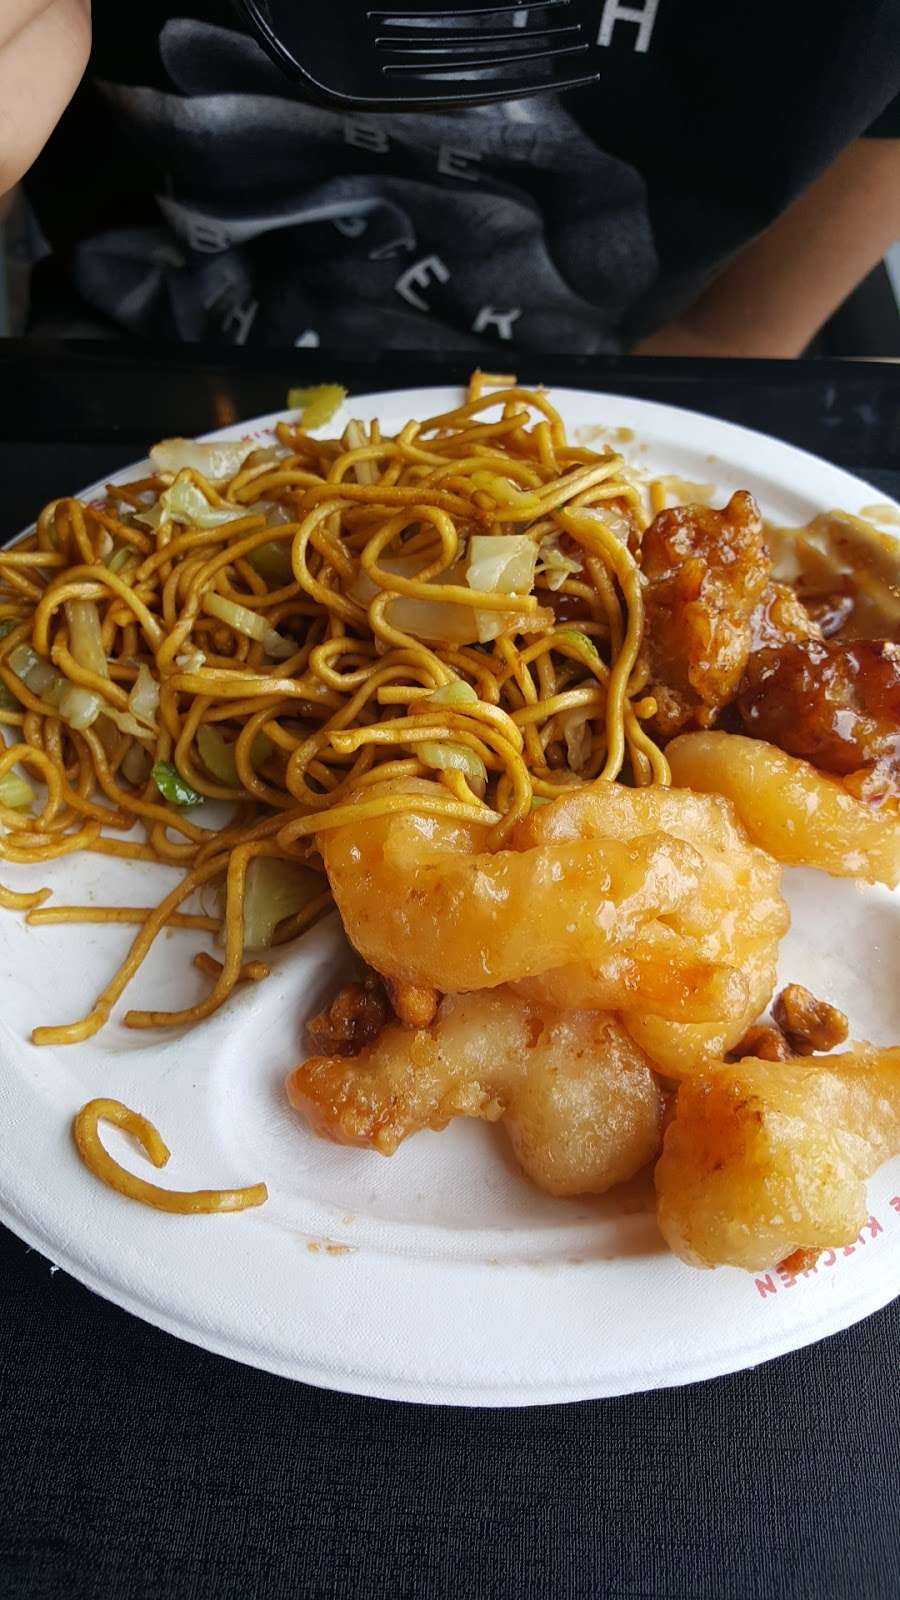 Panda Express | 1010 Ogden Ave, Downers Grove, IL 60515 | Phone: (630) 963-8686